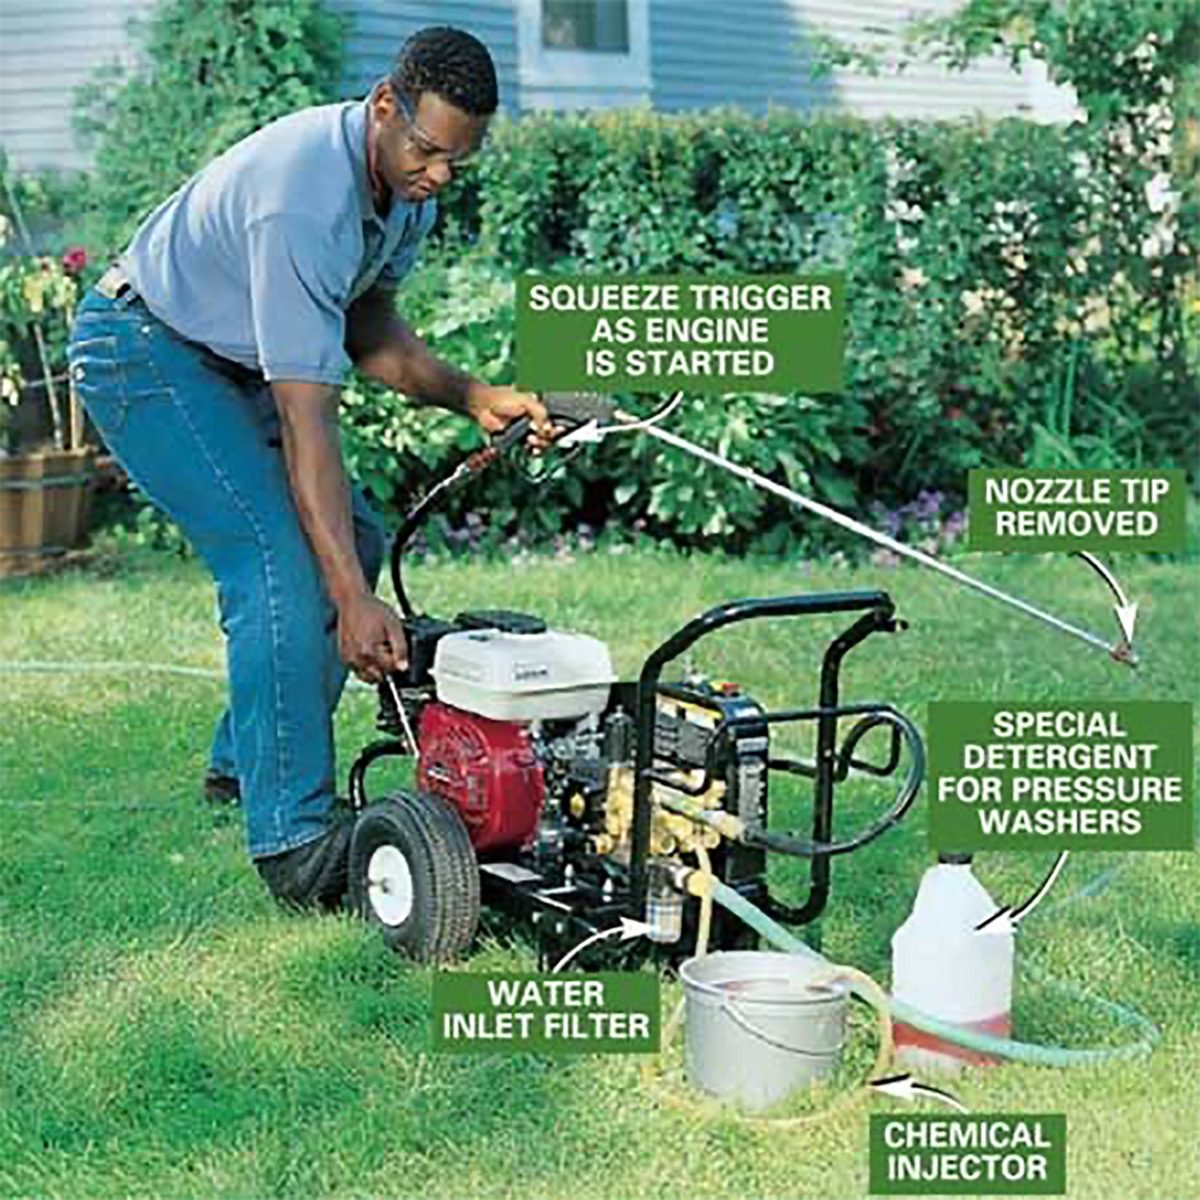 How to Use a Pressure Washer Correctly and Safely